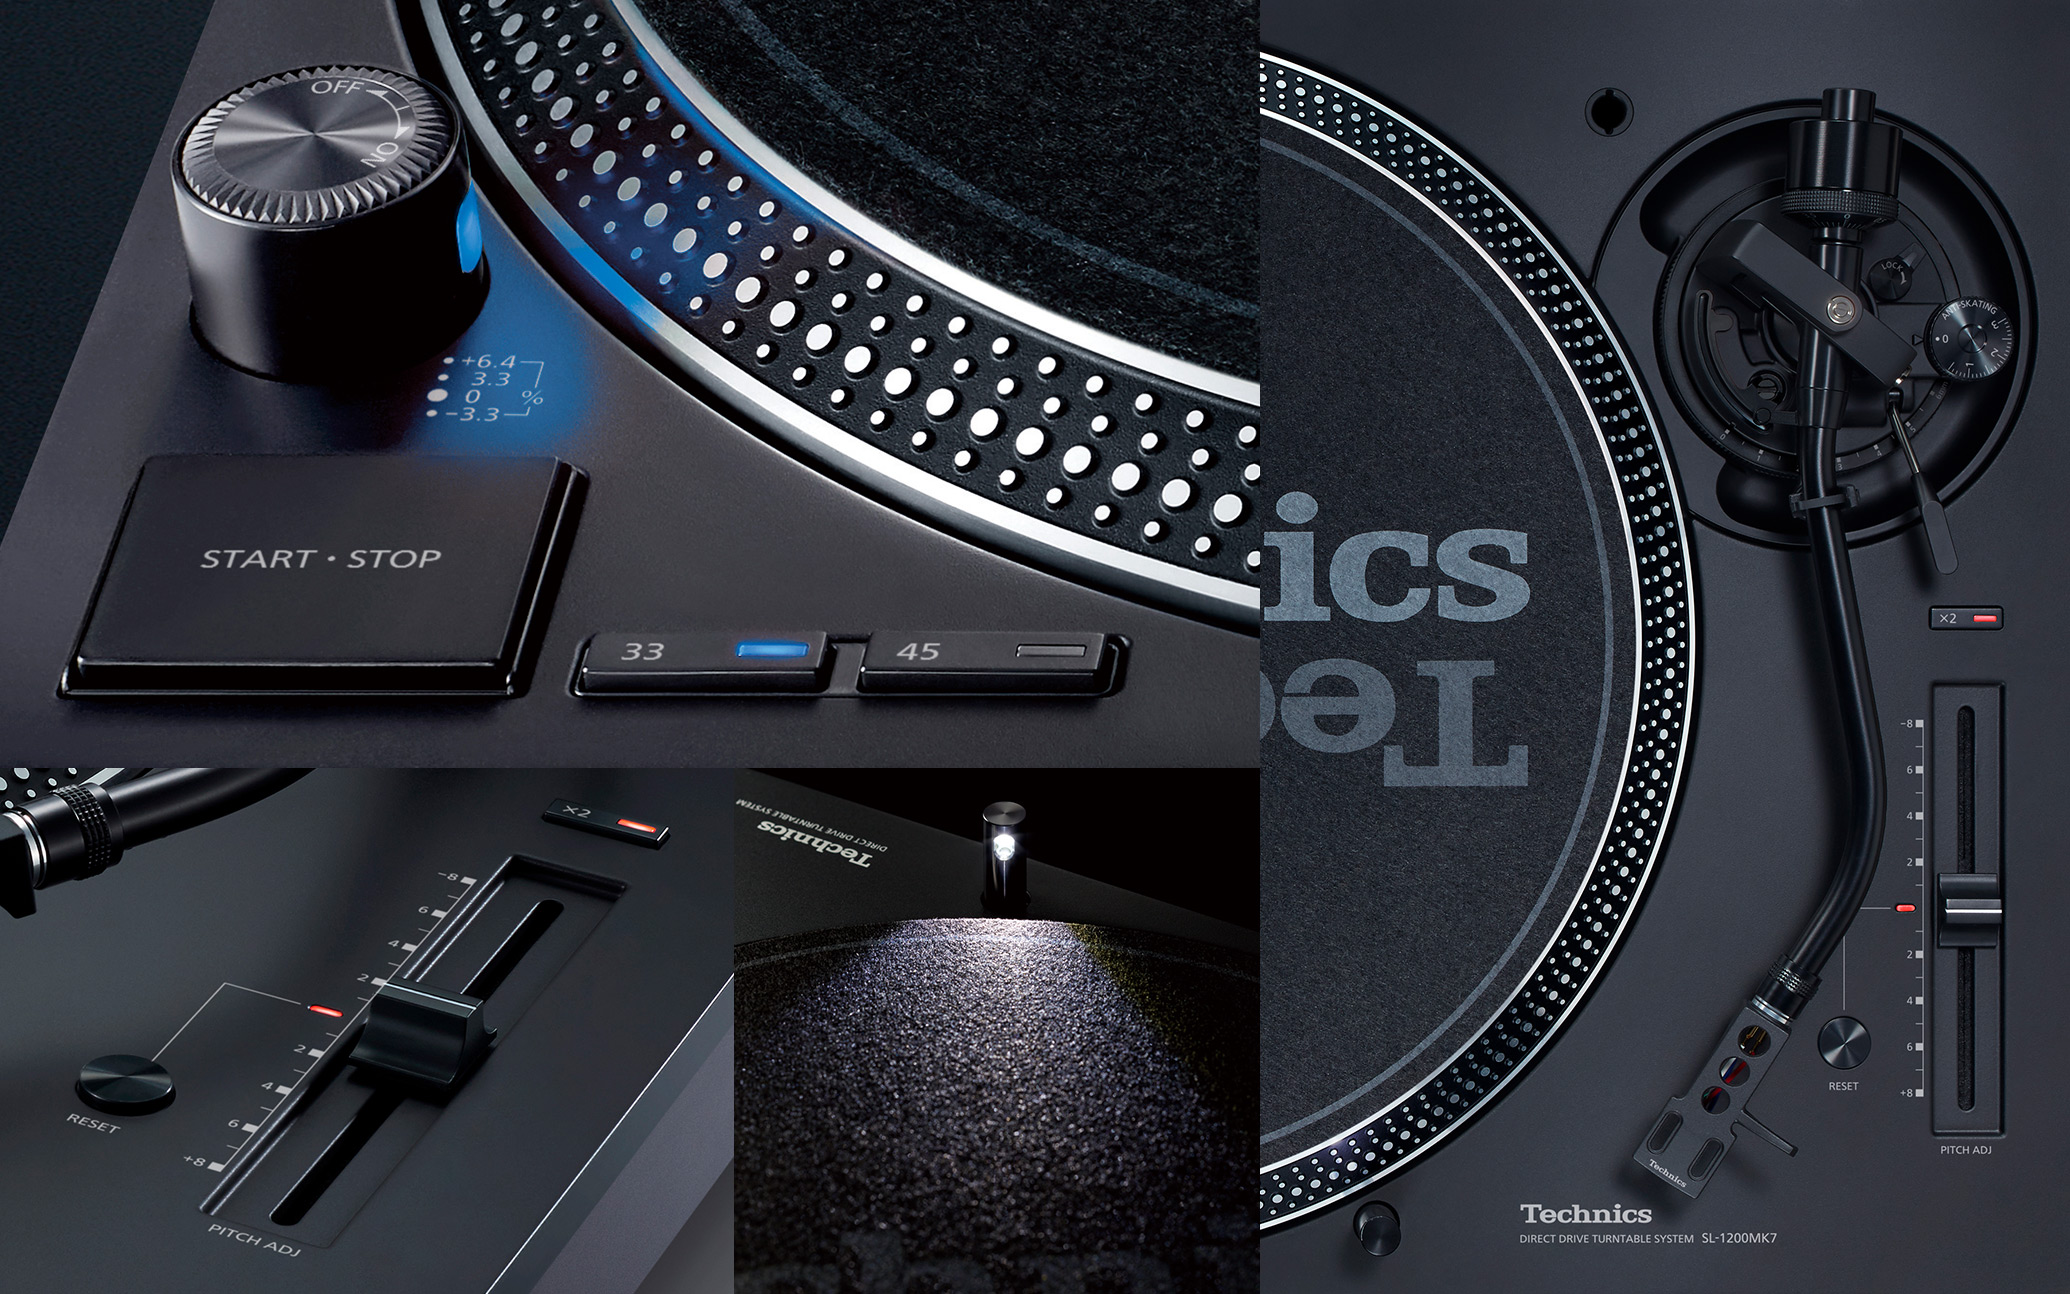 photo:Close to the details of technics SL-1200MK7